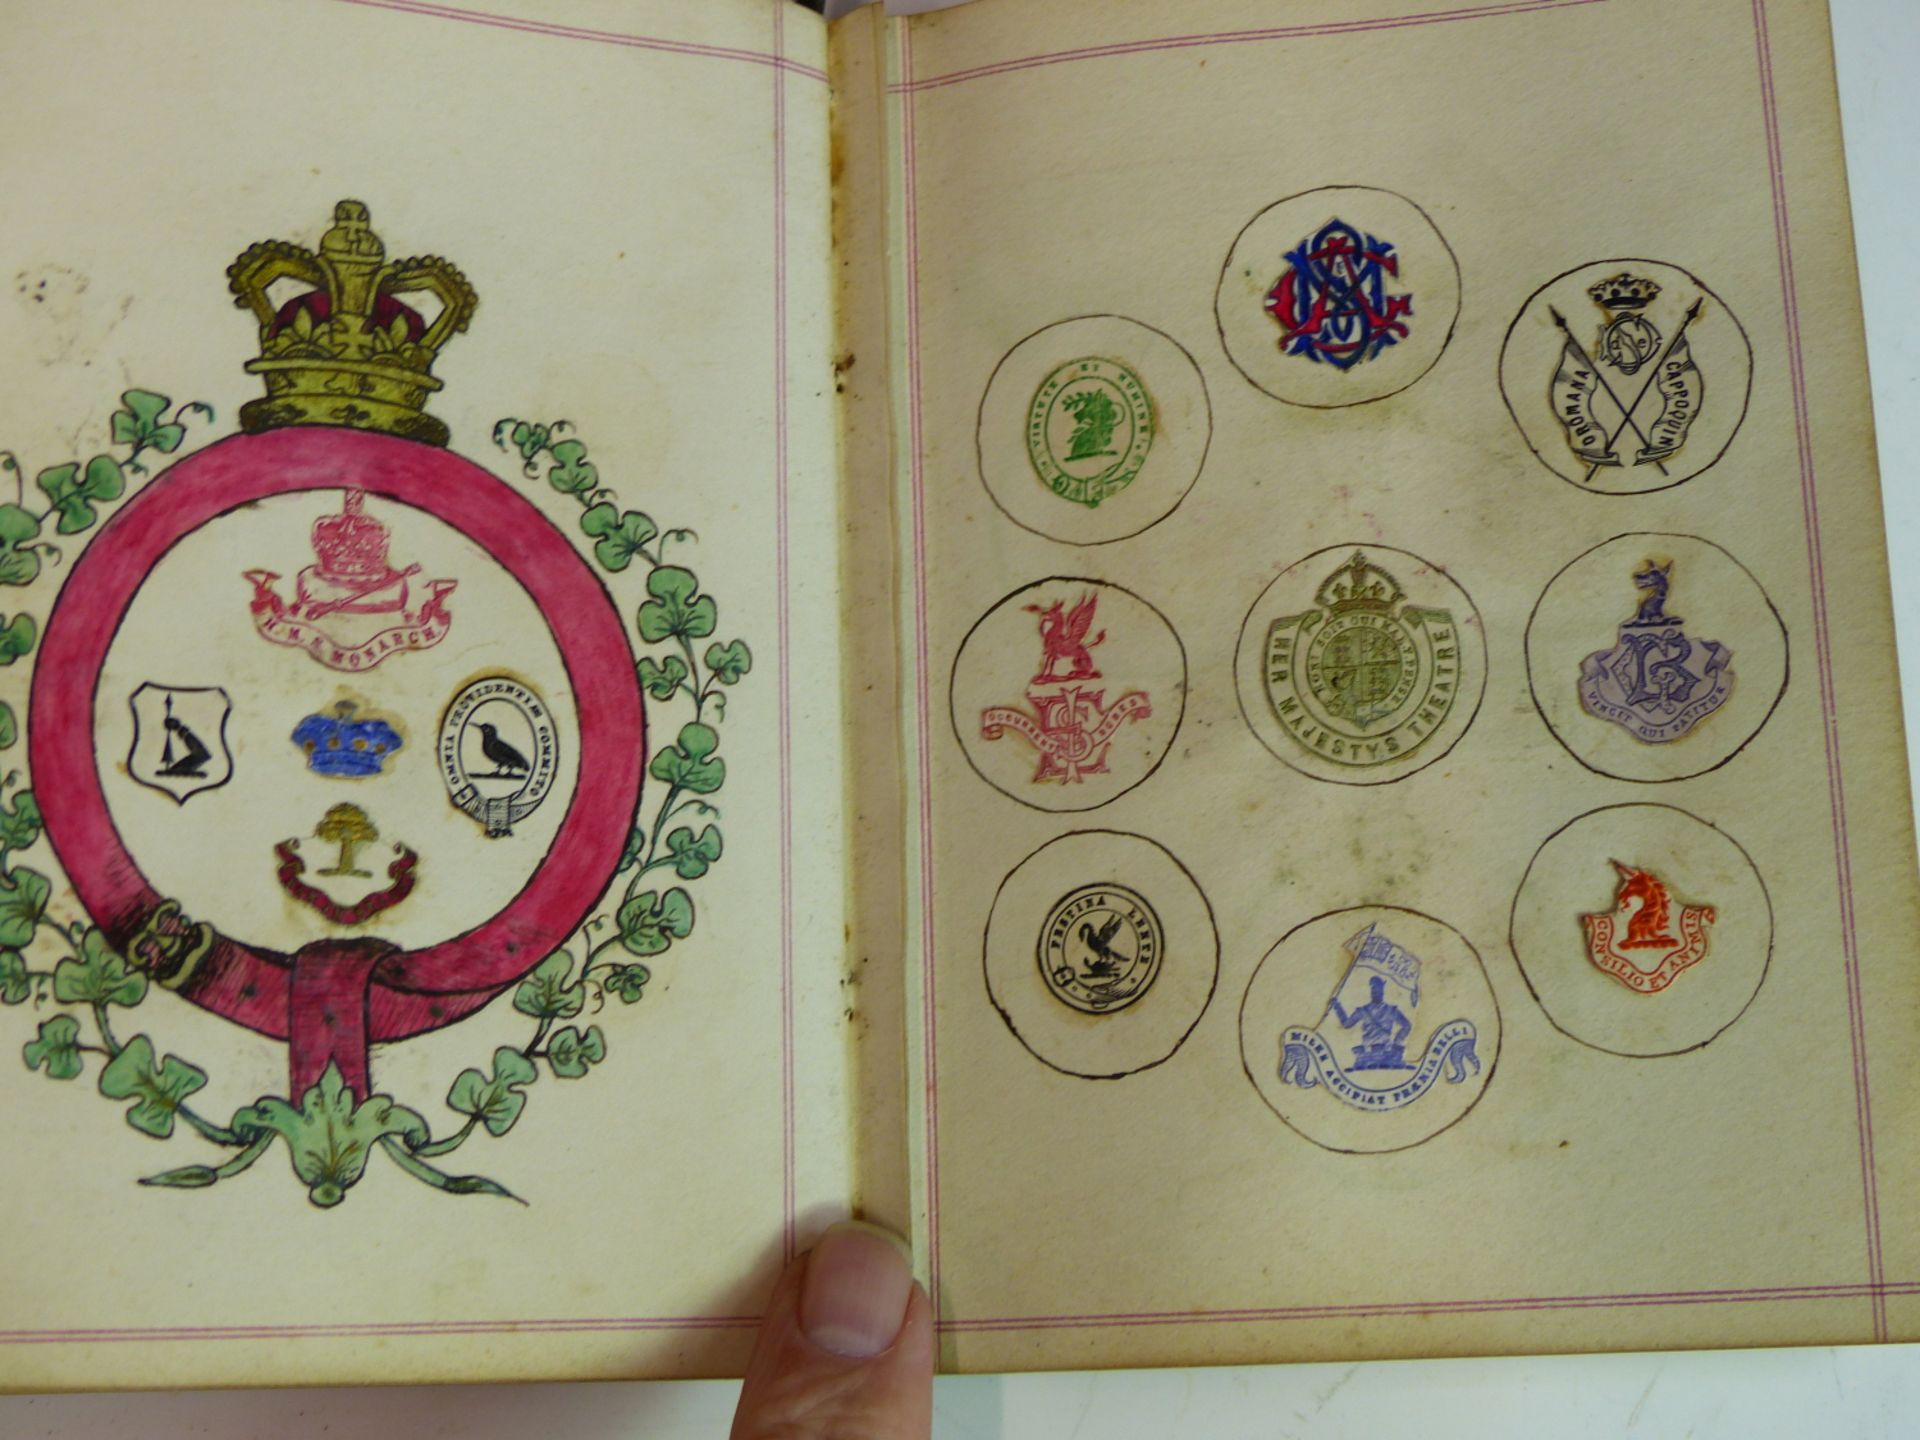 TWO VICTORIAN ALBUMS CONTAINING NUMEROUS CRESTS AND MONOGRAMS FROM LETTER HEADS ETC. - Image 9 of 9